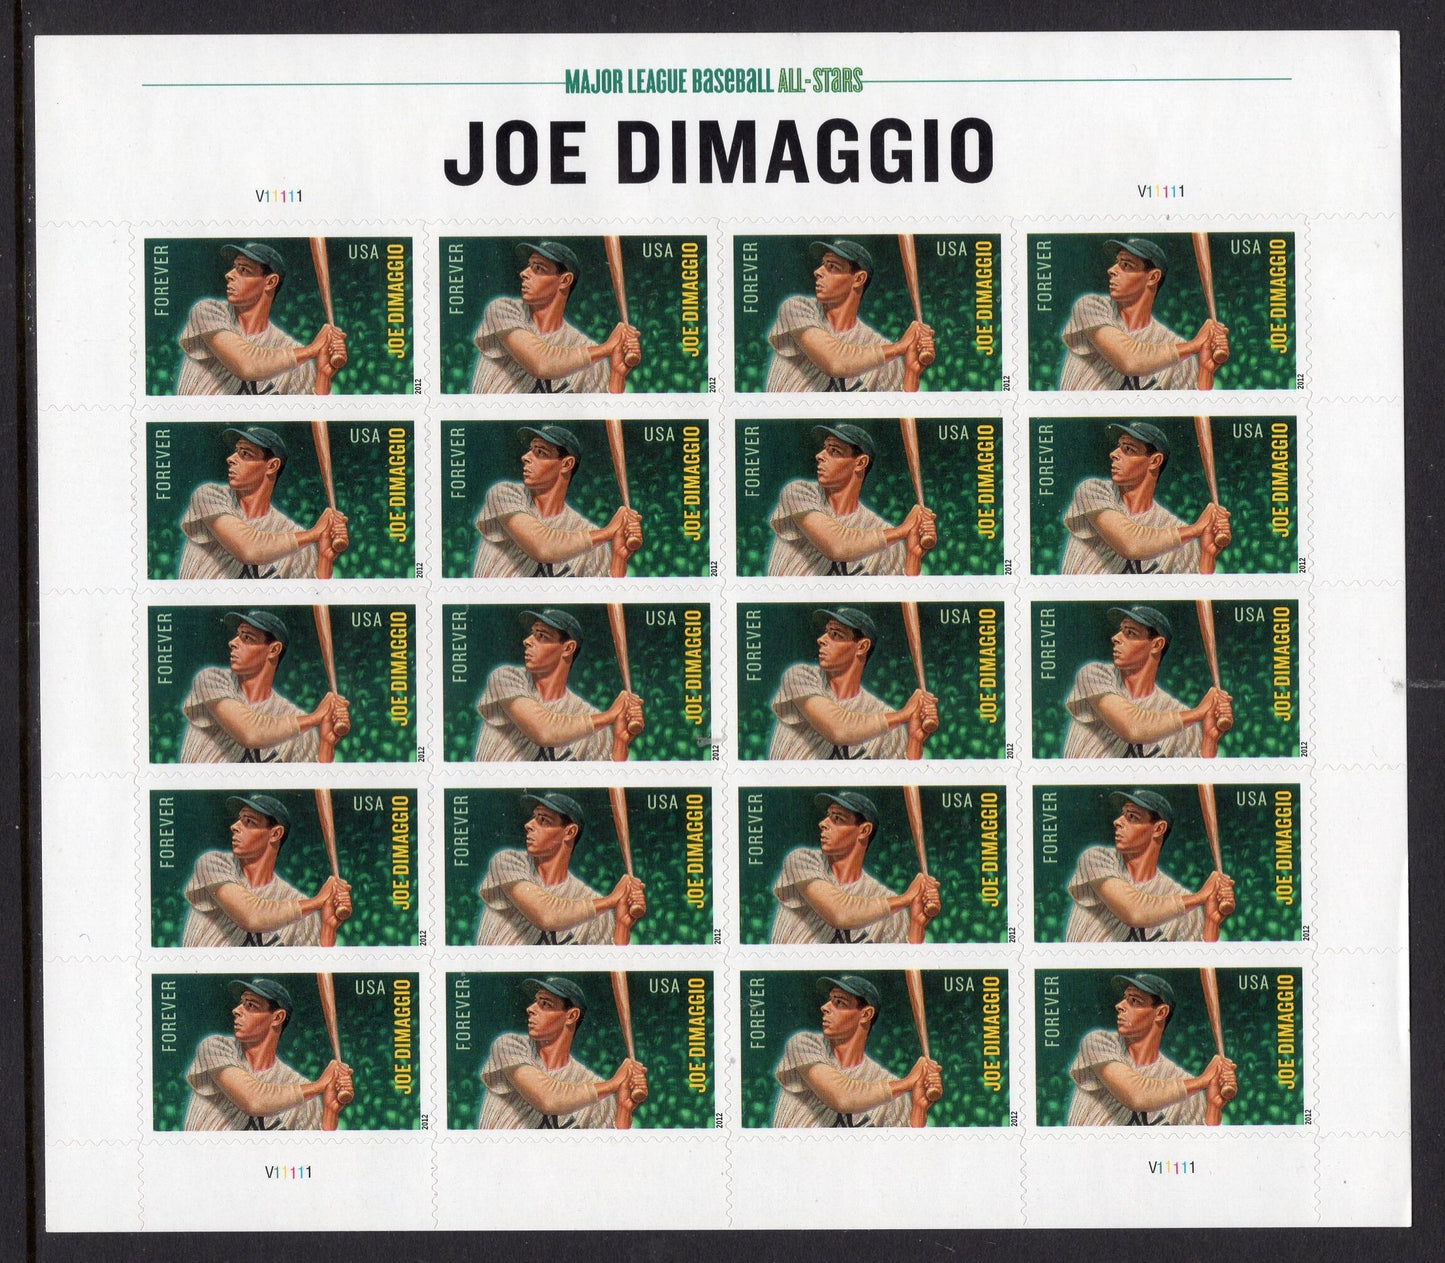 1 JOE DiMAGGIO New York YANKEES Baseball All - star Sheet of 20 Unused USA Postage Stamps Issued in 2012 - s4697 -